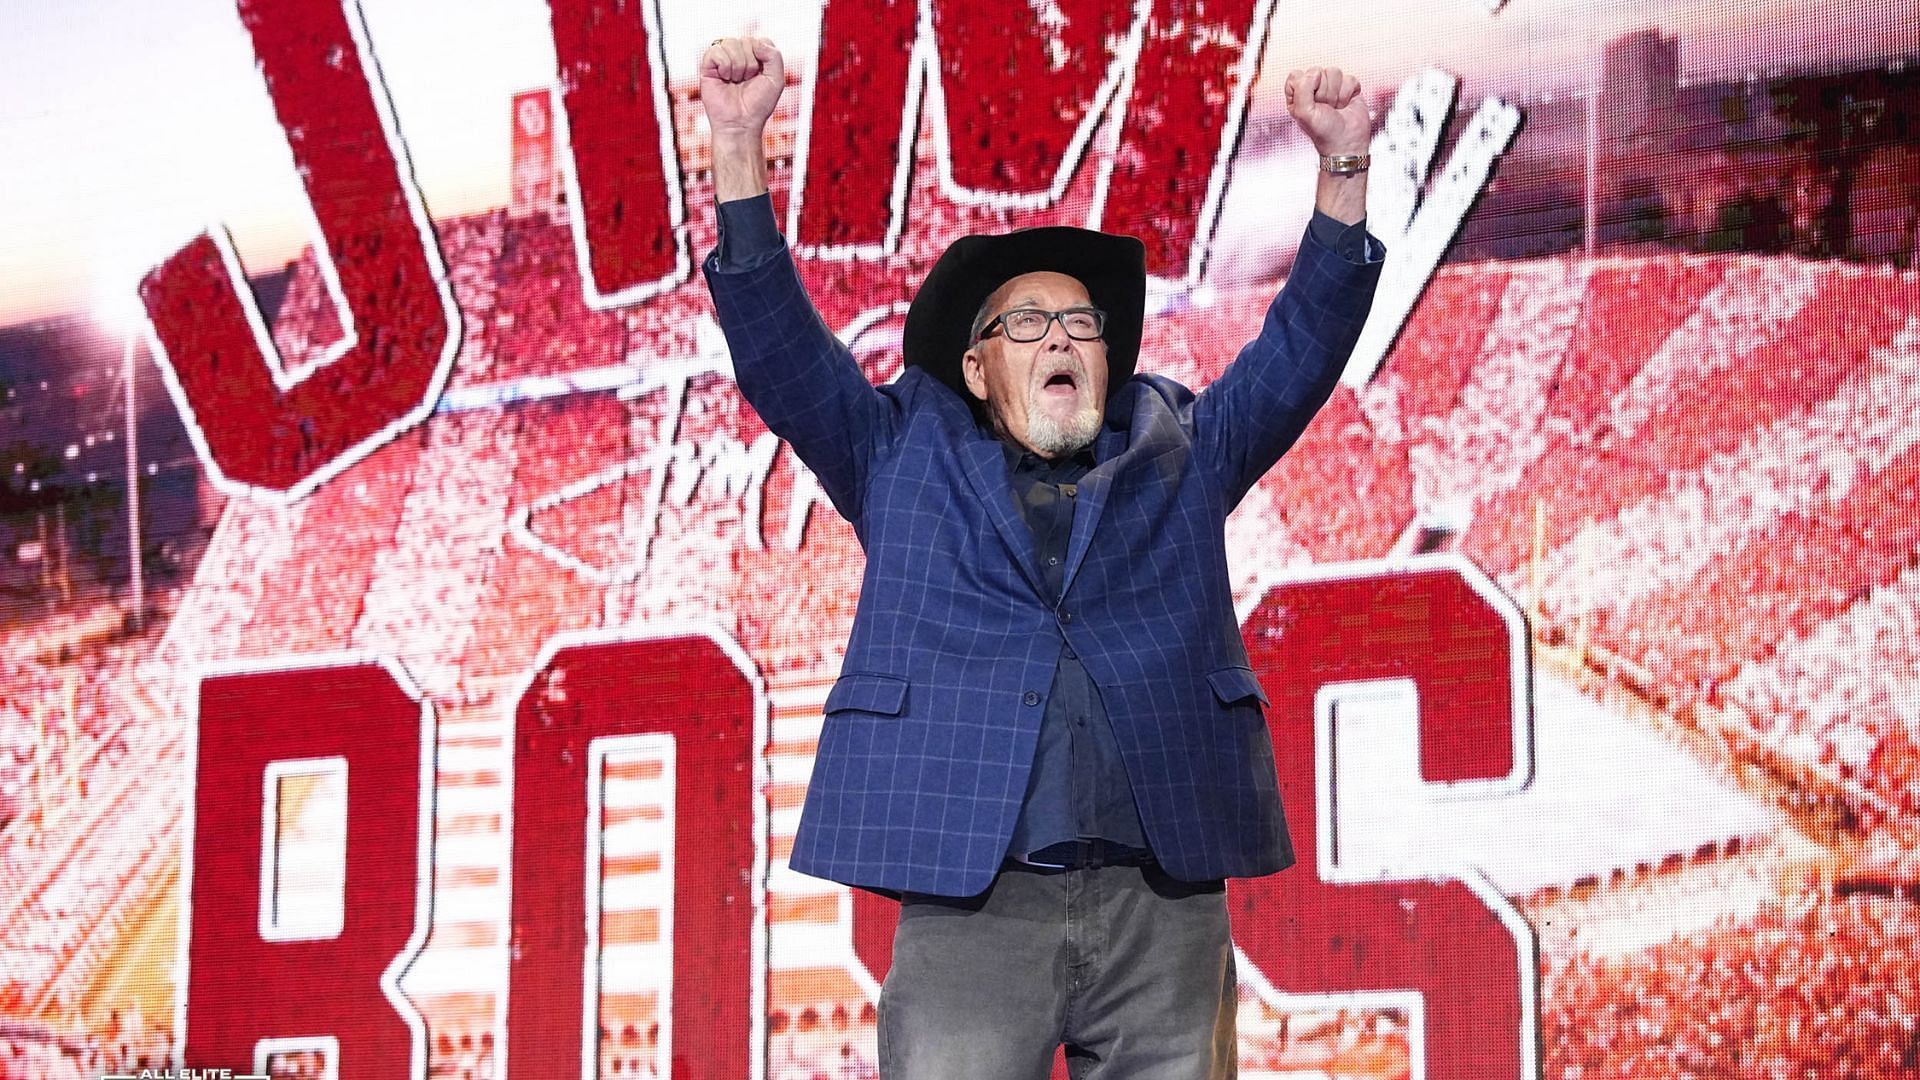 Jim Ross is a legendary commentator who is now with AEW [photo courtesy of AEW